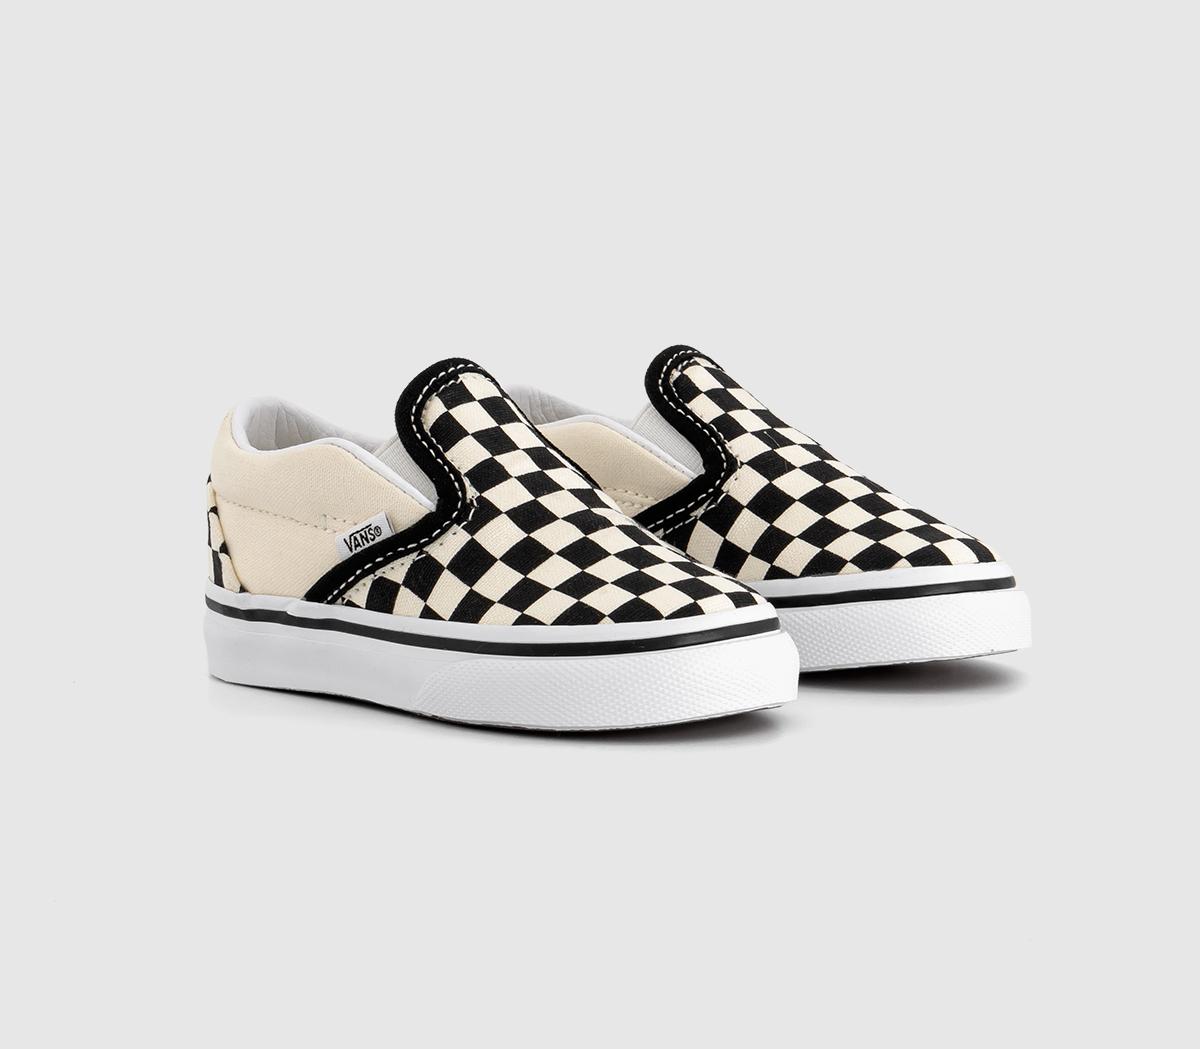 Vans Kids Toddlers Black And White Checkerboard Classic Slip On Trainers, Size: 4 Infant